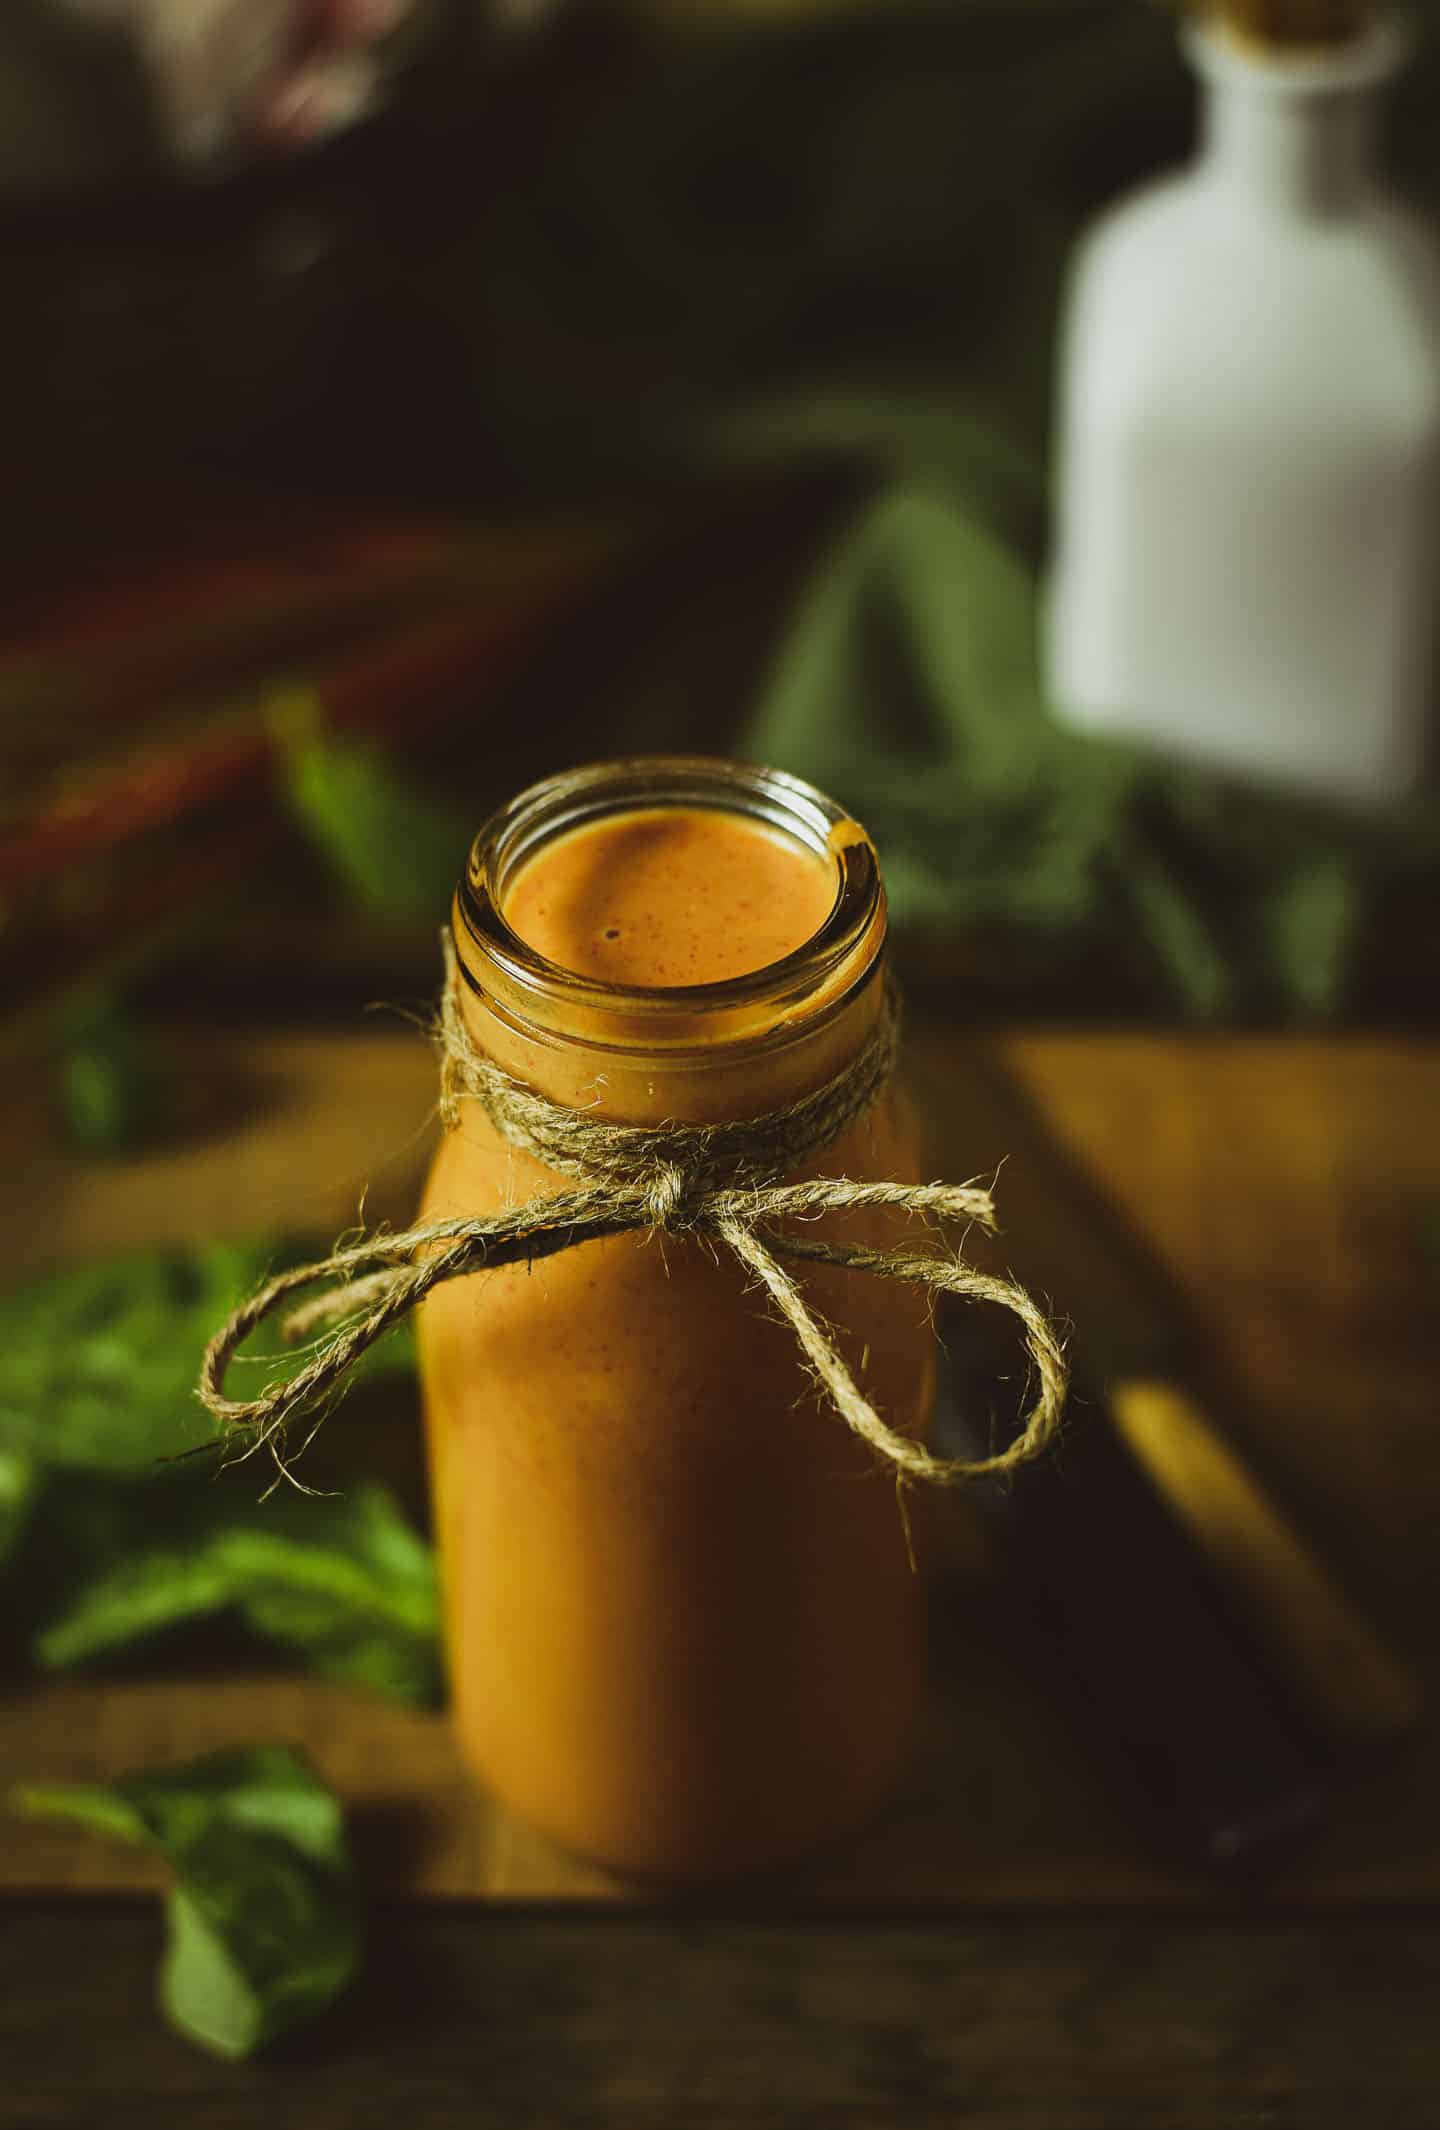 This Vegan French Dressing recipe is so easy to make, rich and creamy, and absolutely delicious. One bowl, 7 simple ingredients, and 5 minutes are all you need to make this healthy oil-free salad dressing.